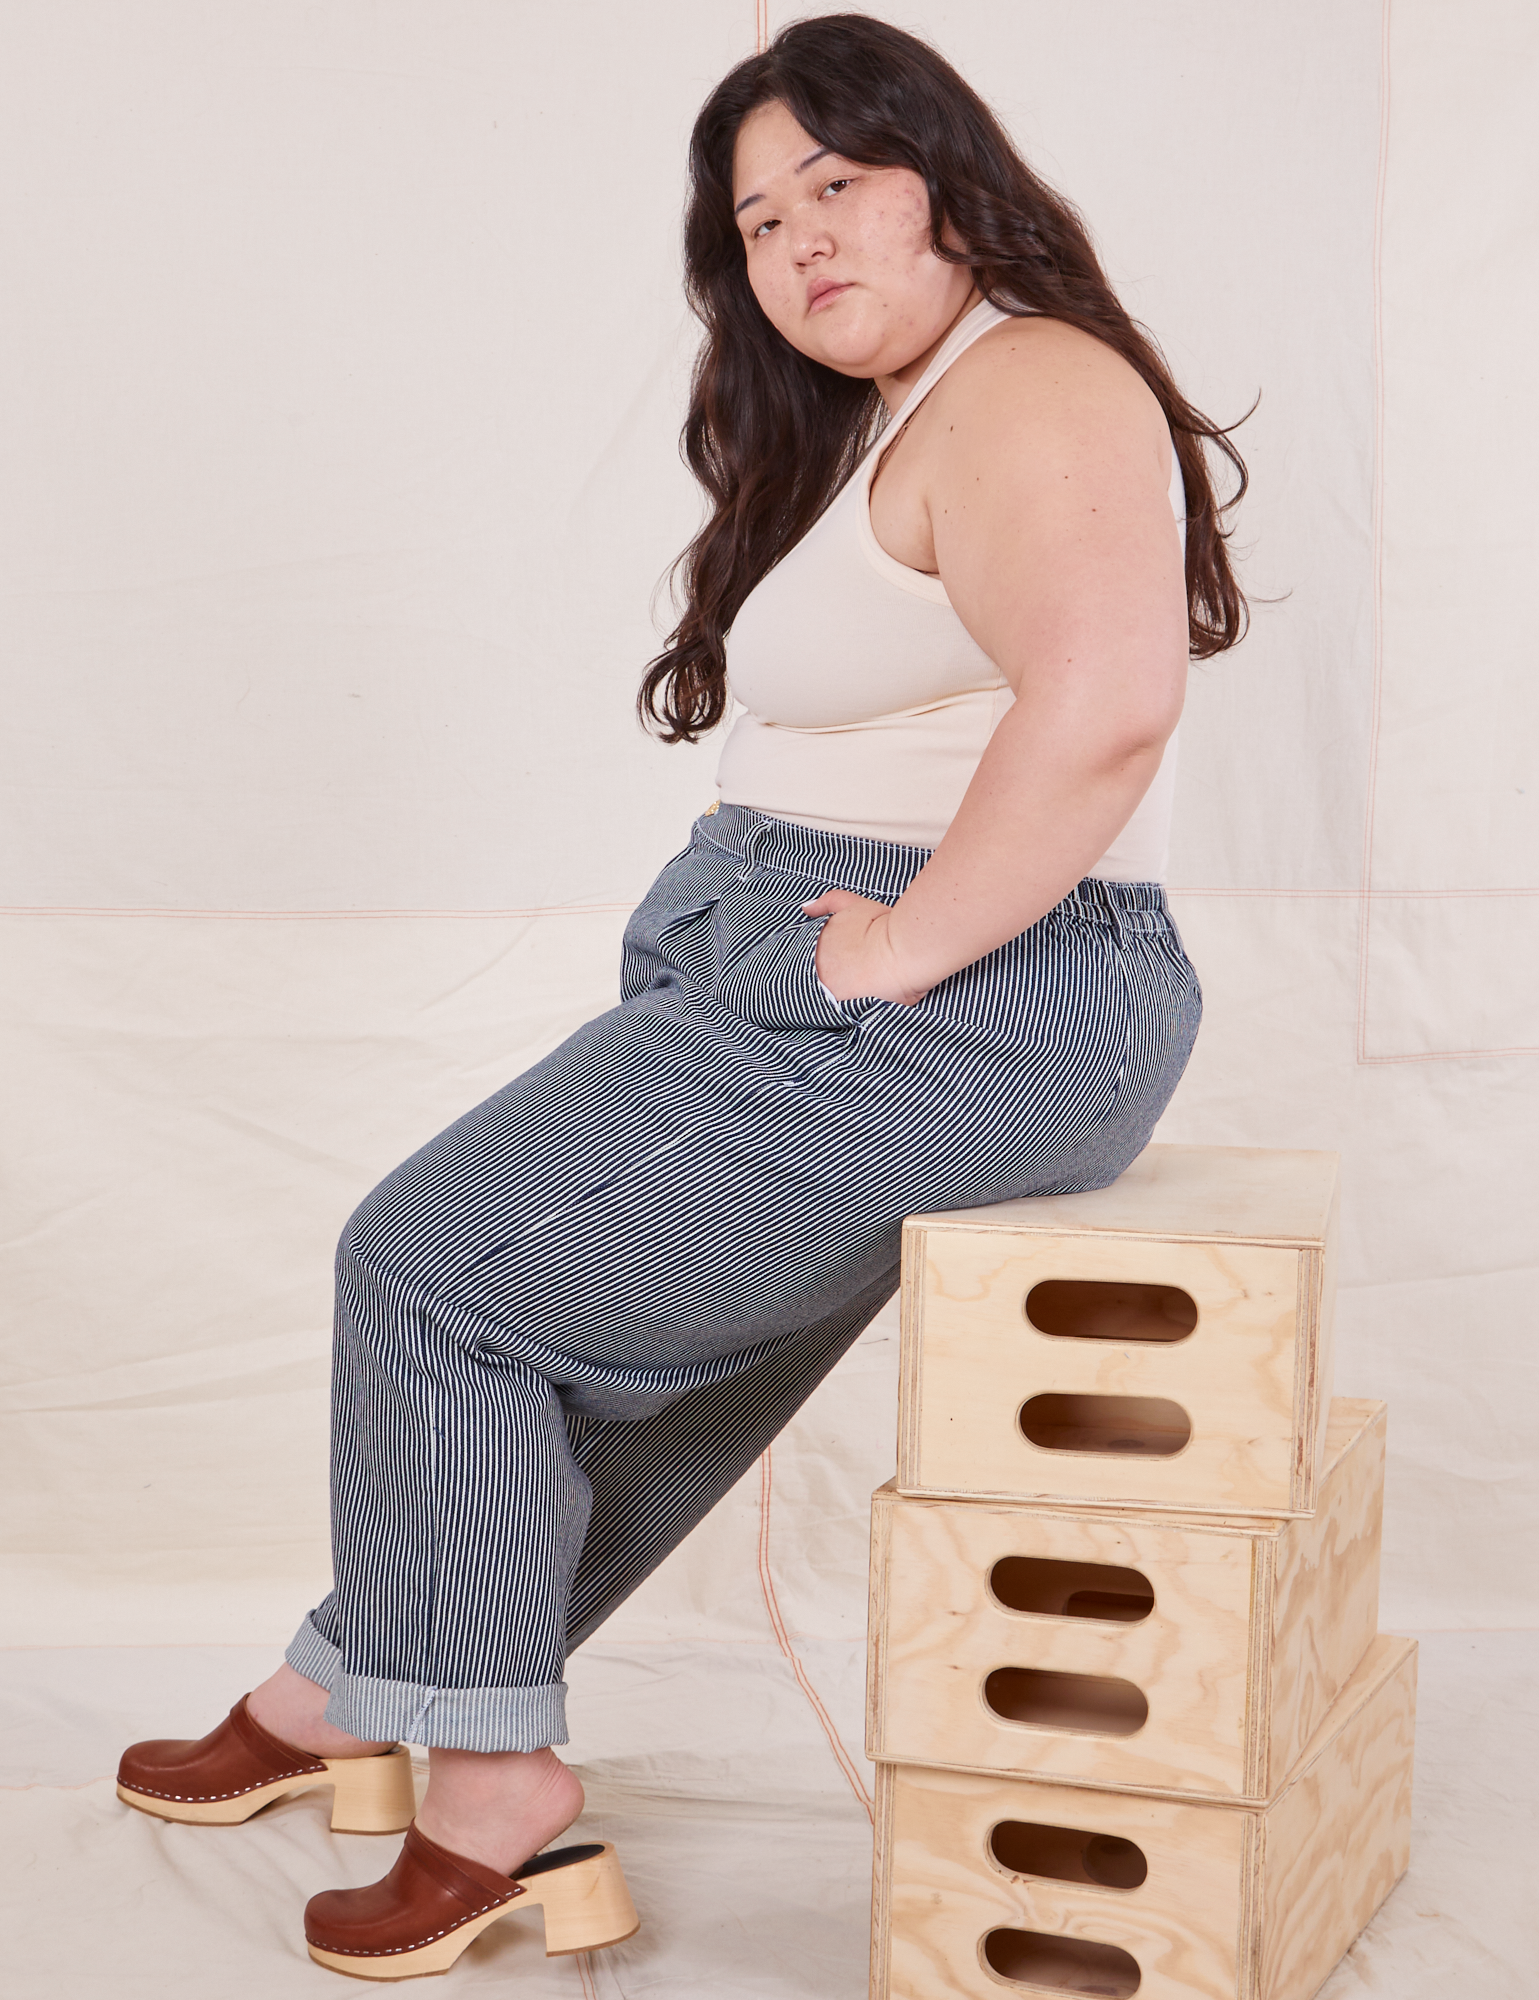 Ashley is sitting sideways on a stack of wooden crates. She is wearing Denim Trouser Jeans in Railroad Stripe and a vintage off-white Tank Top